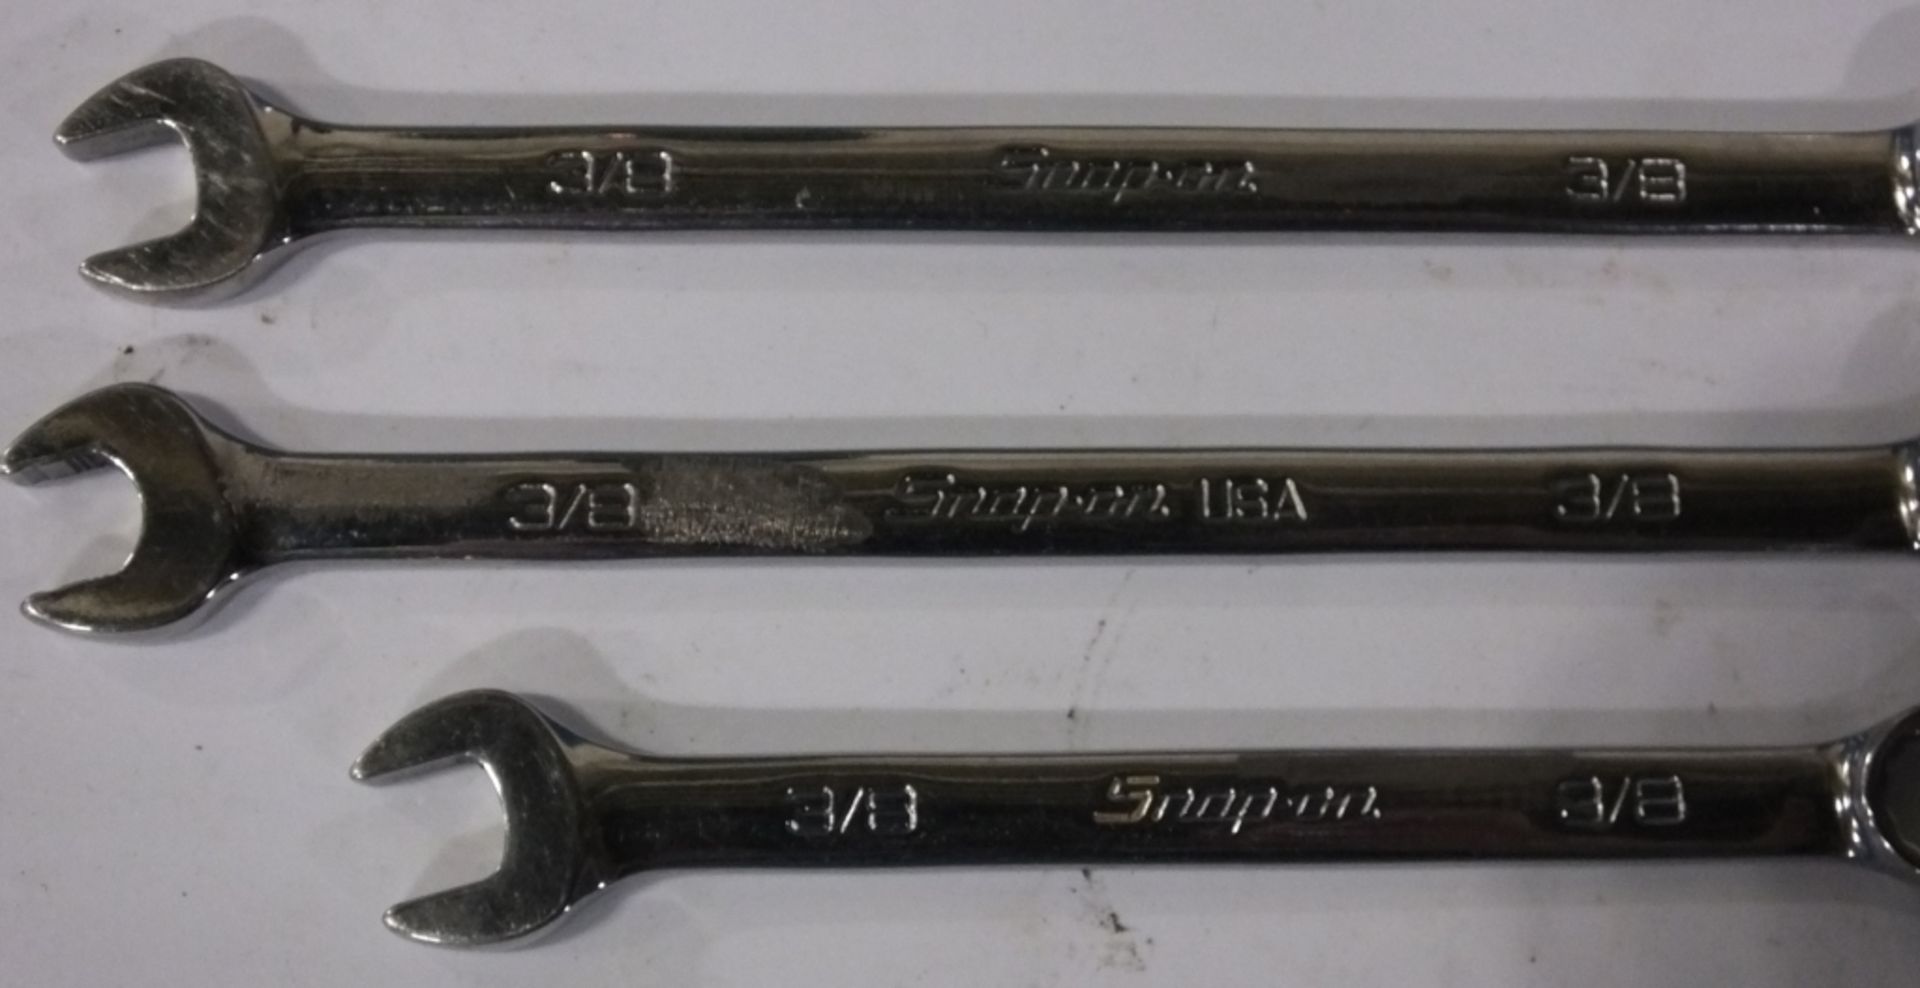 3x Snap-On combination spanners - 3/8 - Image 2 of 3